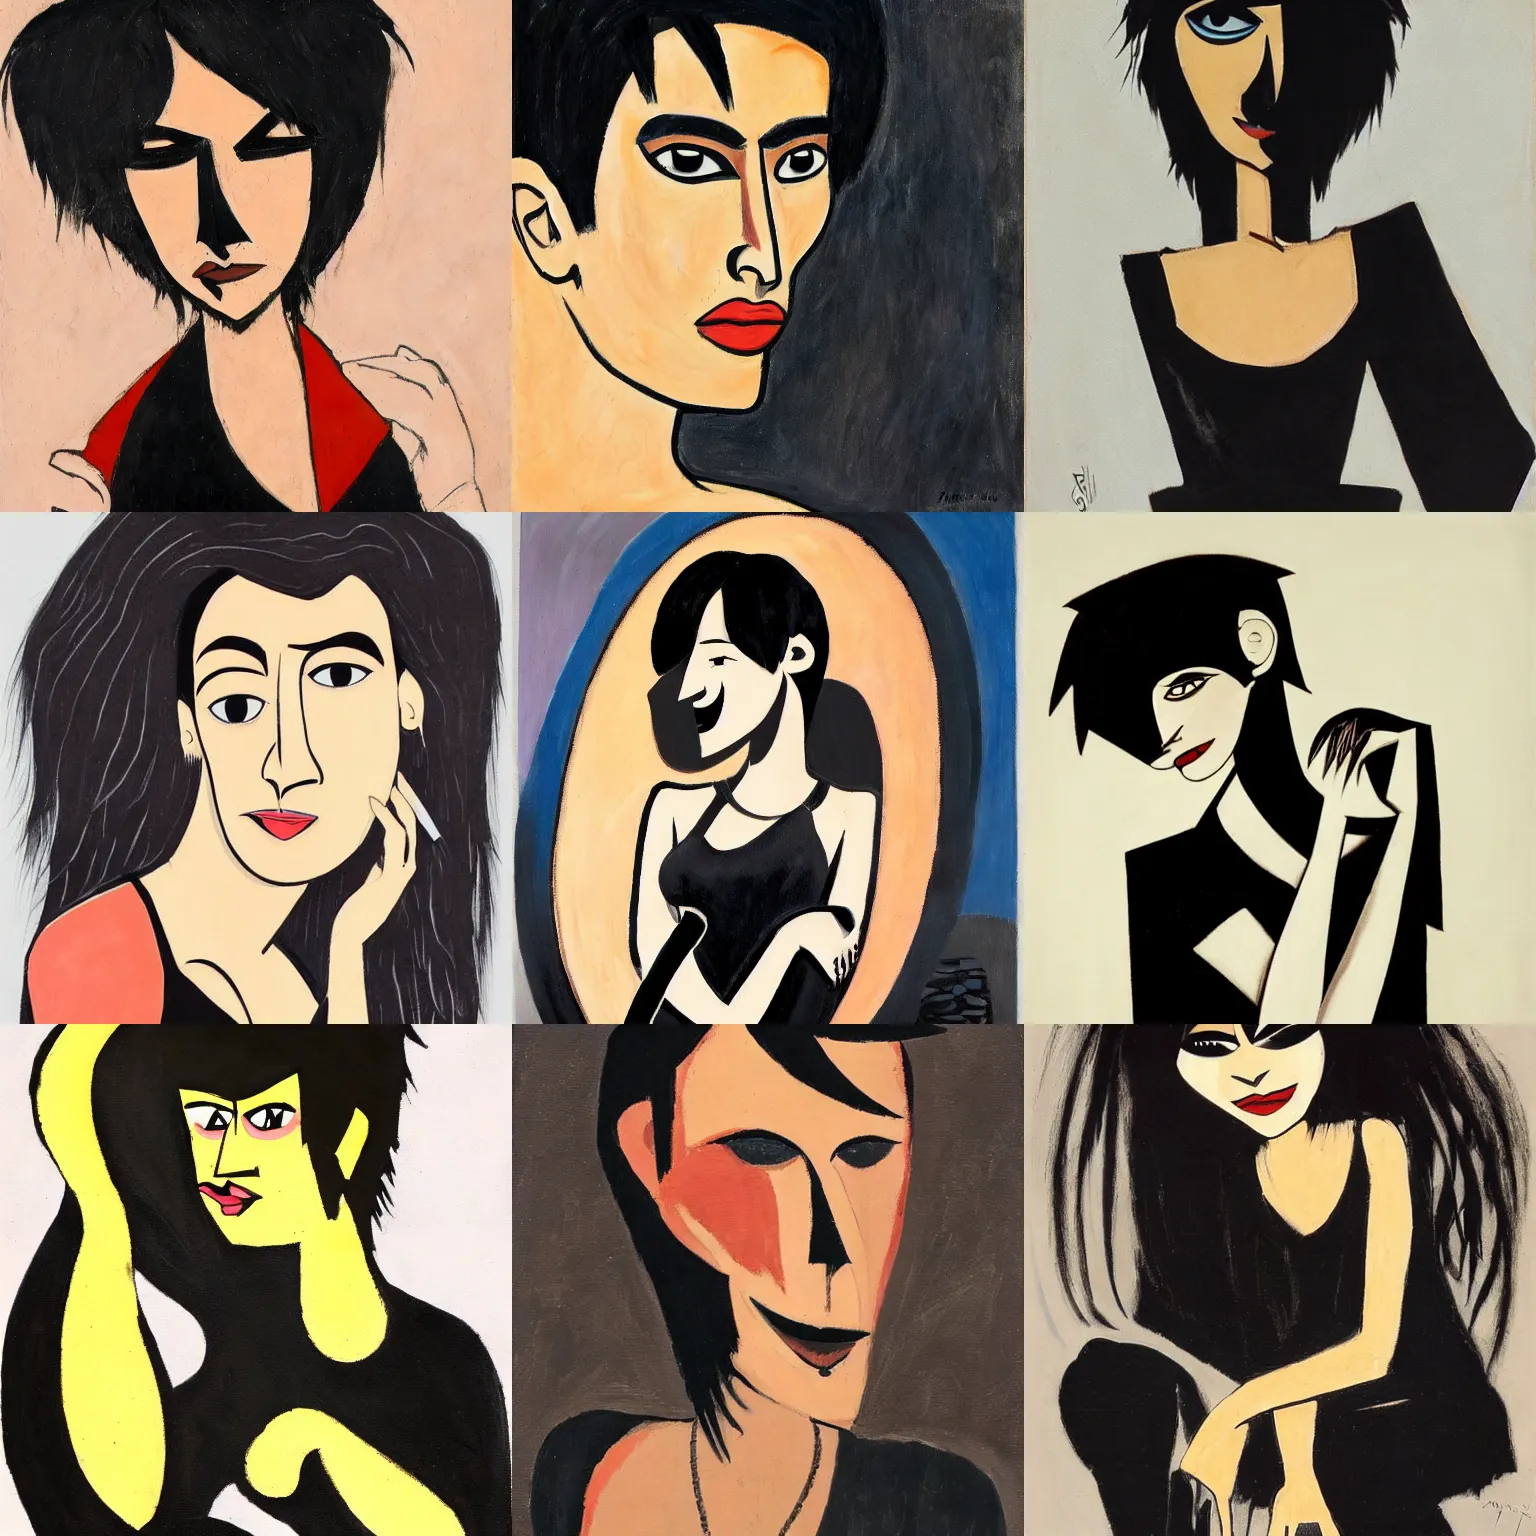 Prompt: an emo by oswaldo guayasamin. her hair is dark brown and cut into a short, messy pixie cut. she has large entirely - black eyes. she is wearing a black tank top, a black leather jacket, a black knee - length skirt, a black choker, and black leather boots.